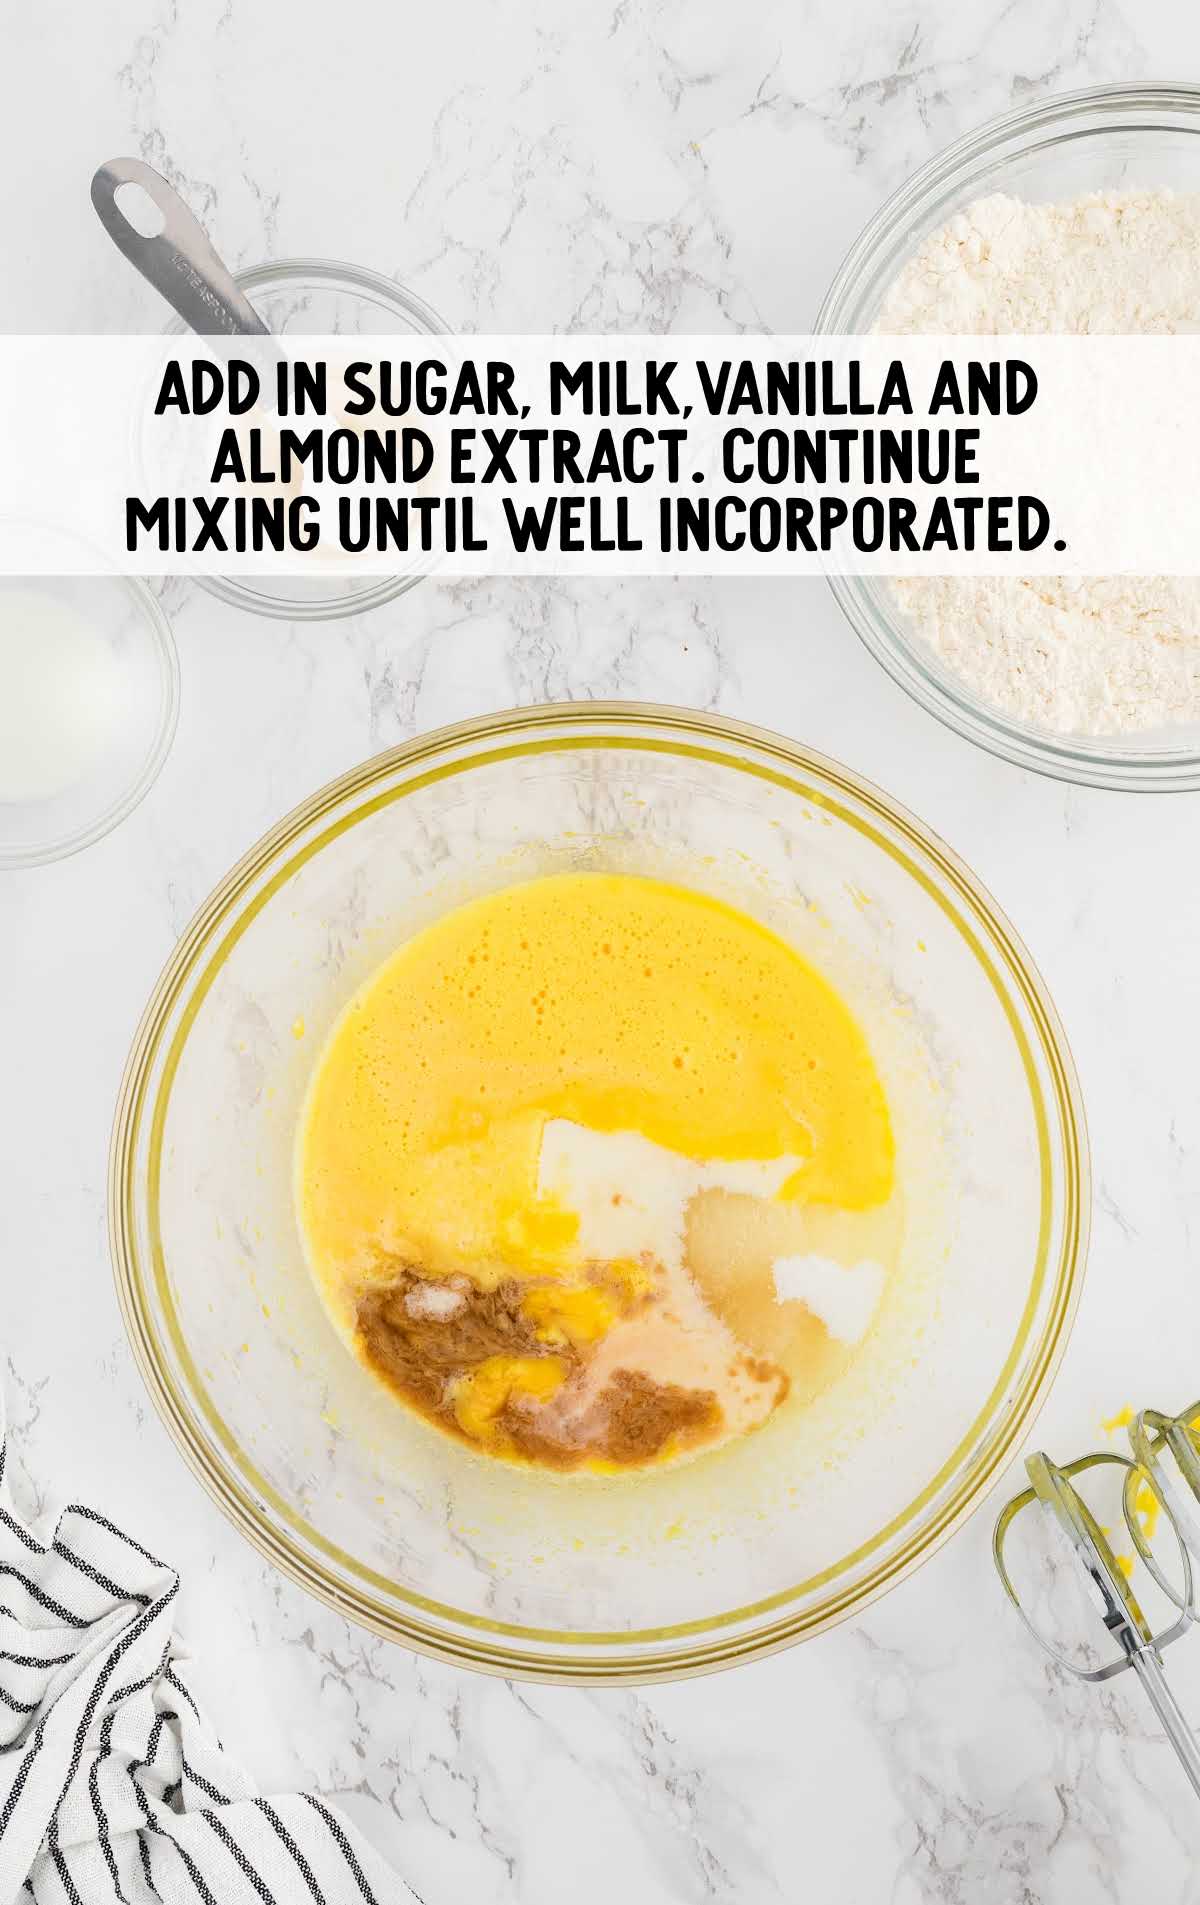 sugar, milk, vanilla and almond extract added to the egg white mixture in a bowl